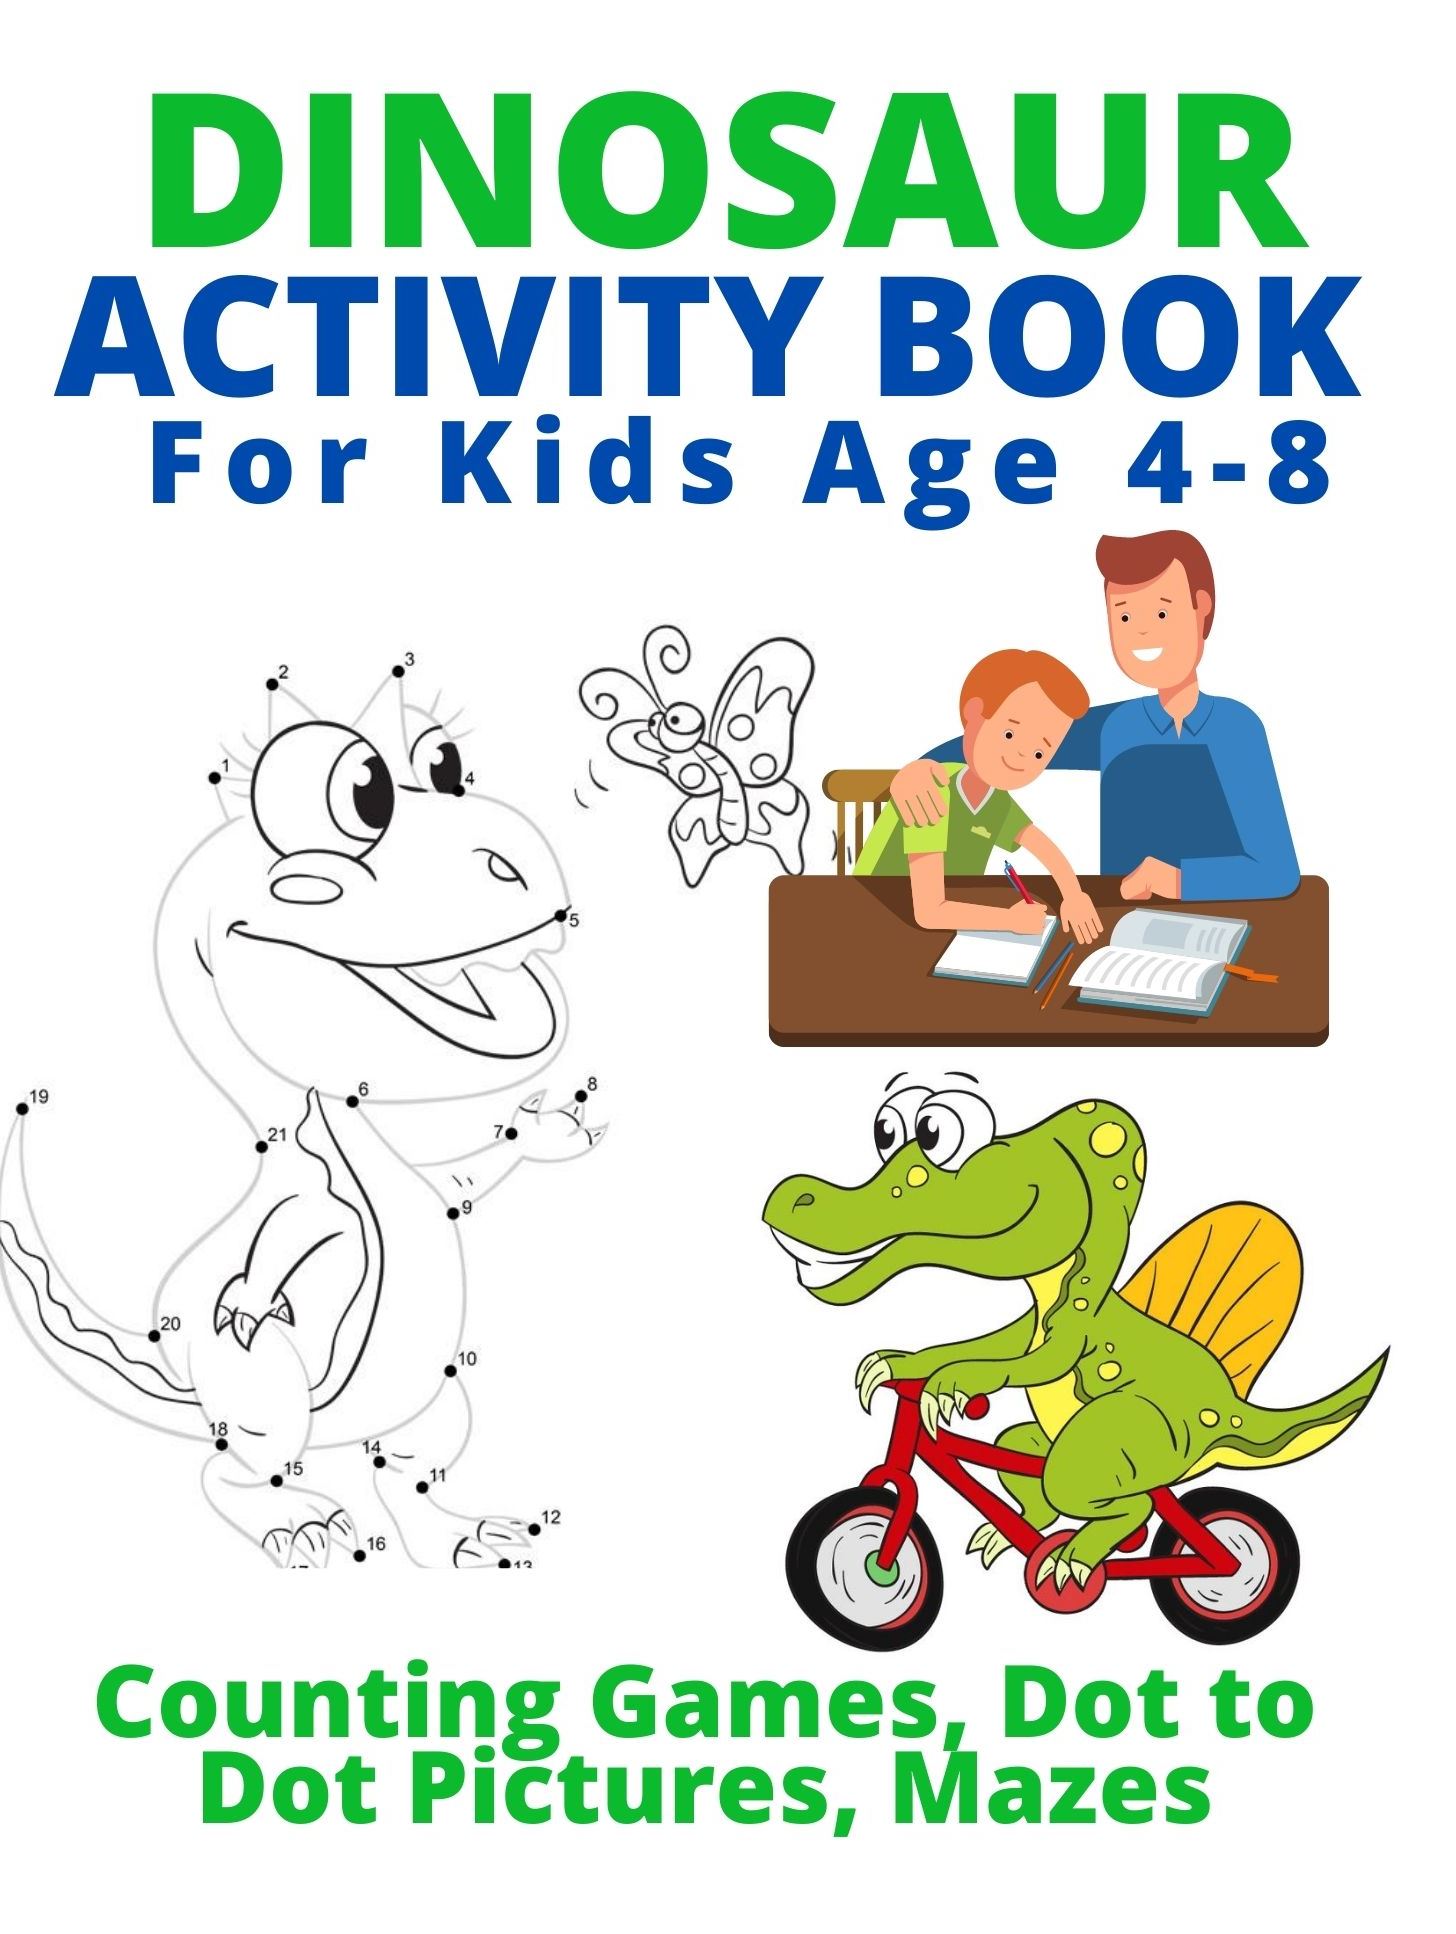 http://www.booksbyheshelow.com/wp-content/uploads/dino-activity-cover.jpg